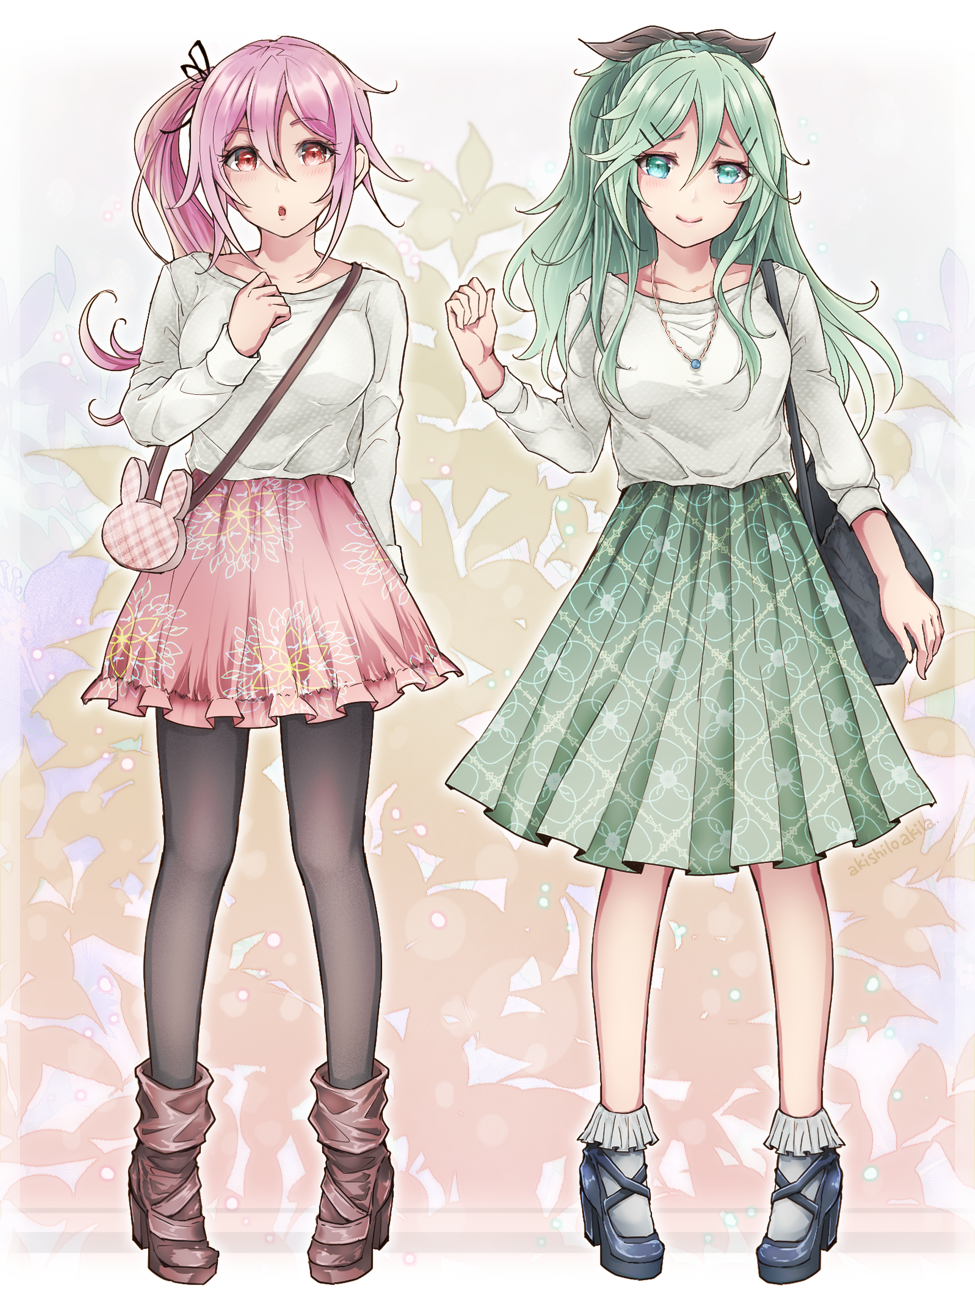 2girls :o akira_(aky-la) alternate_costume ankle_boots aqua_eyes aqua_hair arm_at_side artist_name asymmetrical_hair bag black_boots black_legwear black_ribbon blouse blue_shoes blush boots breasts casual collarbone comic commentary_request eyebrows_visible_through_hair floral_background floral_print frilled_skirt frills full_body green_skirt hair_between_eyes hair_ornament hair_ribbon hairclip handbag harusame_(kantai_collection) high_heel_boots high_heels highres jewelry kantai_collection long_hair long_skirt long_sleeves medium_breasts medium_skirt multiple_girls necklace no_headgear open_mouth over_shoulder pantyhose pendant pigeon-toed pink_hair pink_skirt plaid plaid_bag pleated_skirt ponytail red_eyes ribbon shoes side_ponytail skirt socks standing white_legwear yamakaze_(kantai_collection)